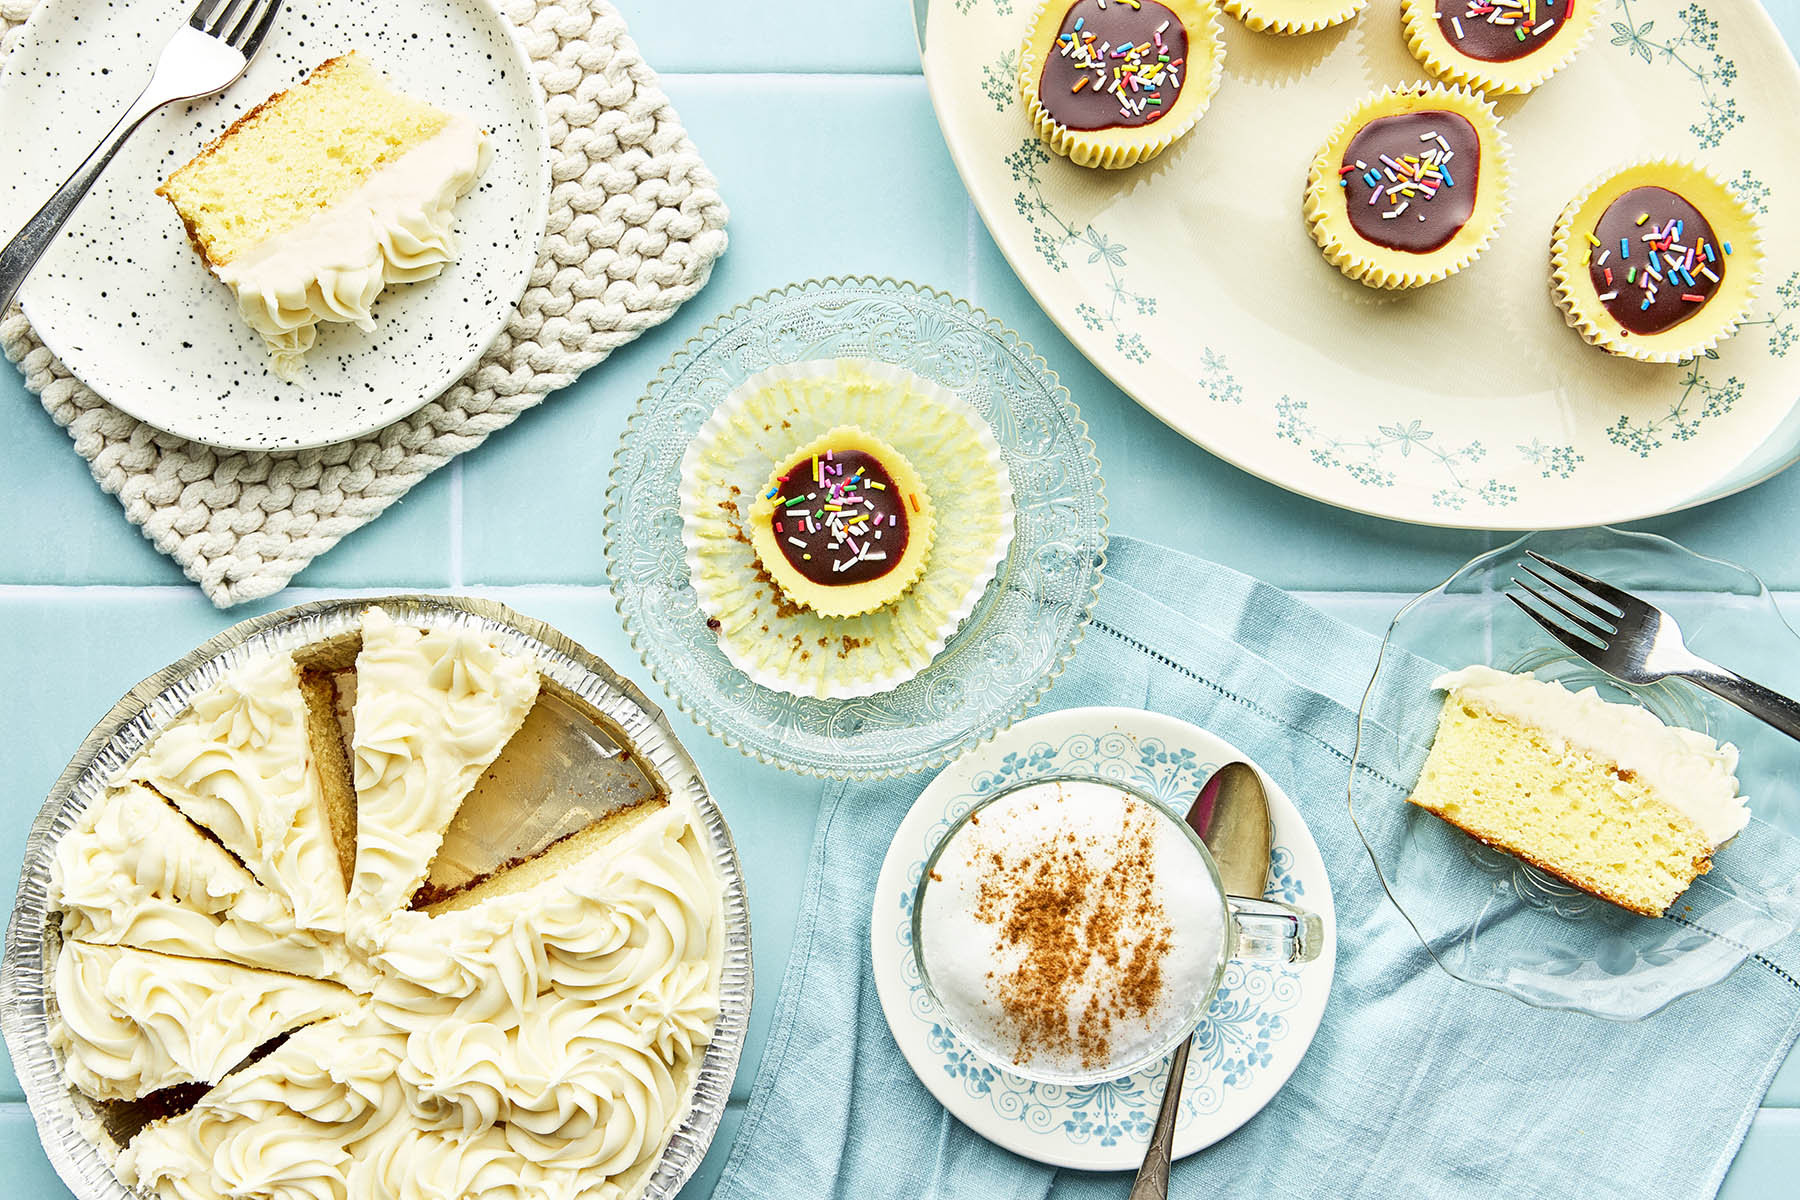 An aqua coloured tile background topped with around a vanilla cake with frosting in a metal tin, plates of singleserving desserts, and a small platter of mini cheesecakes.